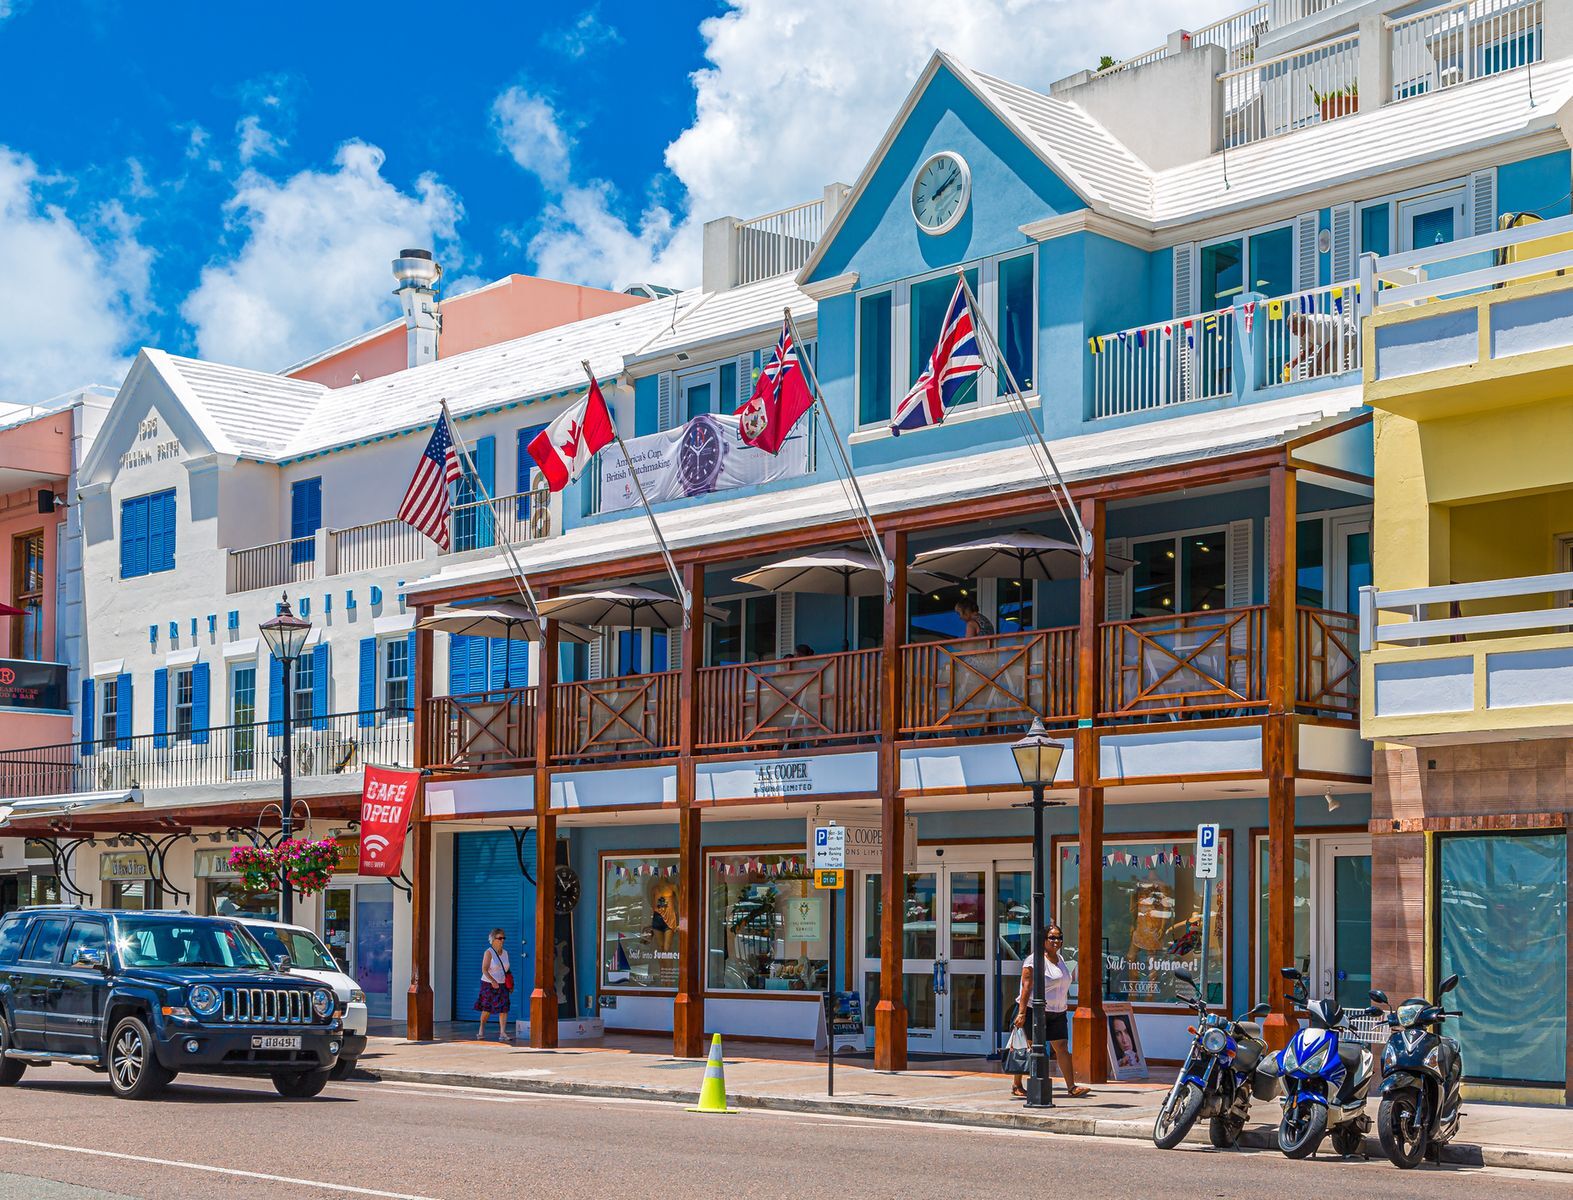 <p>It’s not cheap to live in paradise. In fact, Bermuda’s capital tops <a href="https://www.numbeo.com/cost-of-living/rankings.jsp" title="https://www.numbeo.com/cost-of-living/rankings.jsp">2021’s cost of living index</a>, ahead of six notoriously expensive Swiss cities. Unsurprisingly, Hamilton is also the most expensive city in the world for groceries, with a groceries index of 153.30, more than 16 points higher than the second-place city (Basel, Switzerland). As <a href="https://www.bermuda4u.com/essential/cost-living/" title="https://www.bermuda4u.com/essential/cost-living/">Bermuda4U.com</a> notes, “Almost nothing is produced on the island so everything needs to be imported (mainly from the US). Transport costs, customs duties, and high labour costs increase prices considerably.”</p>